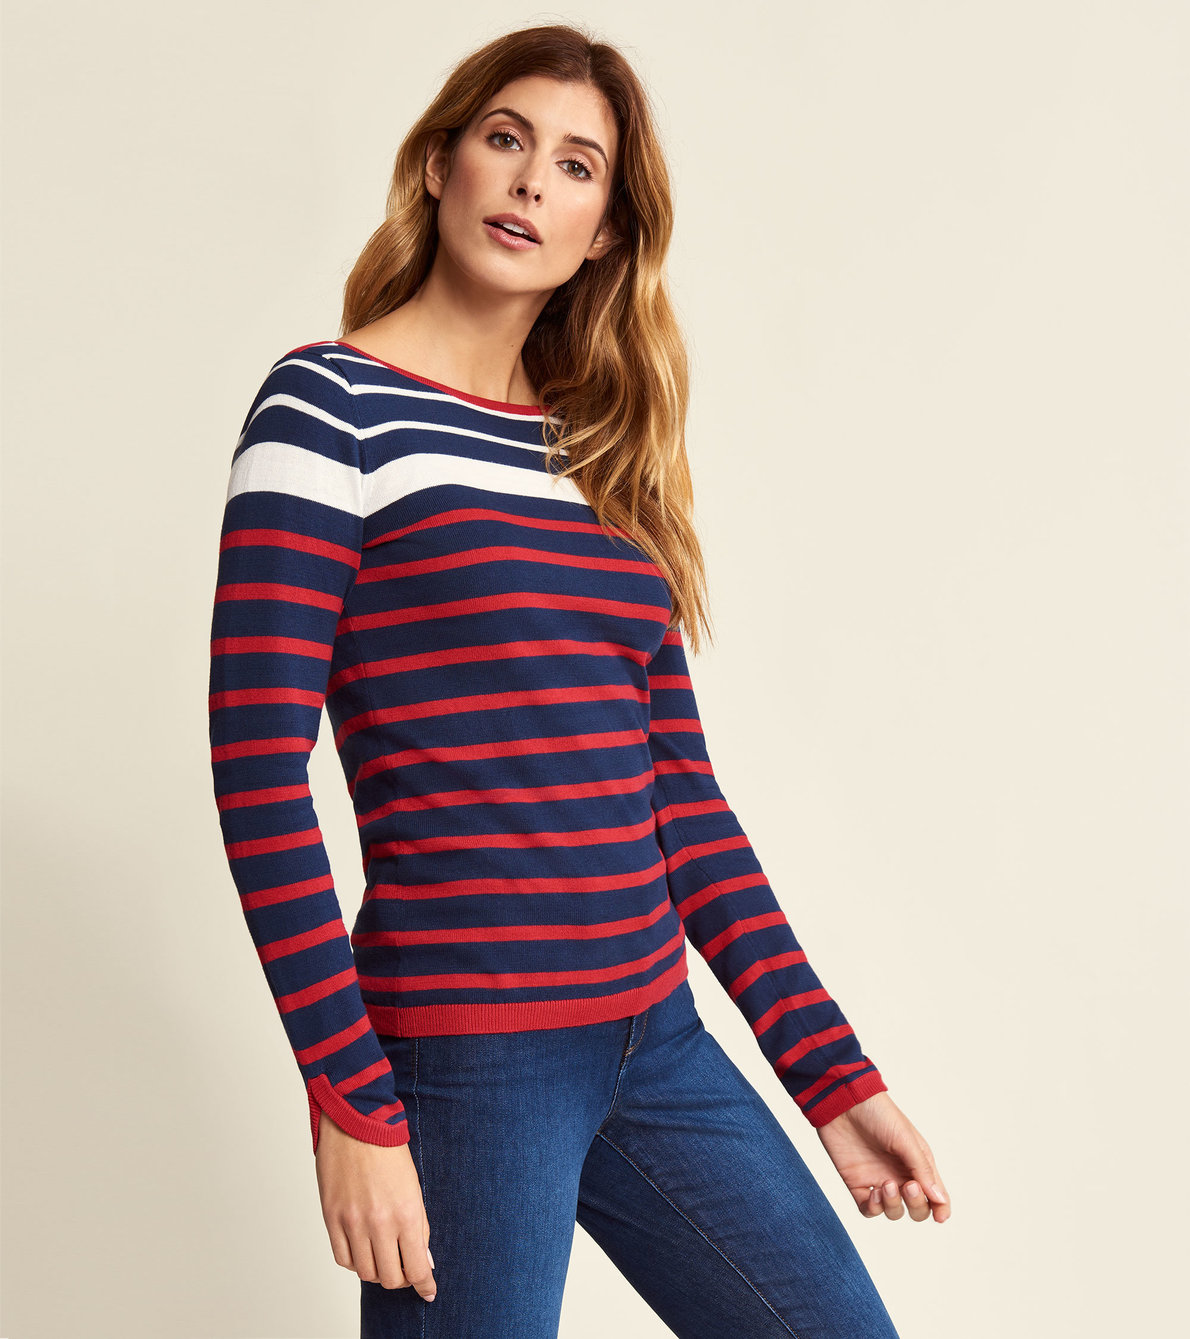 View larger image of Breton Sweater - Navy and Red Stripes